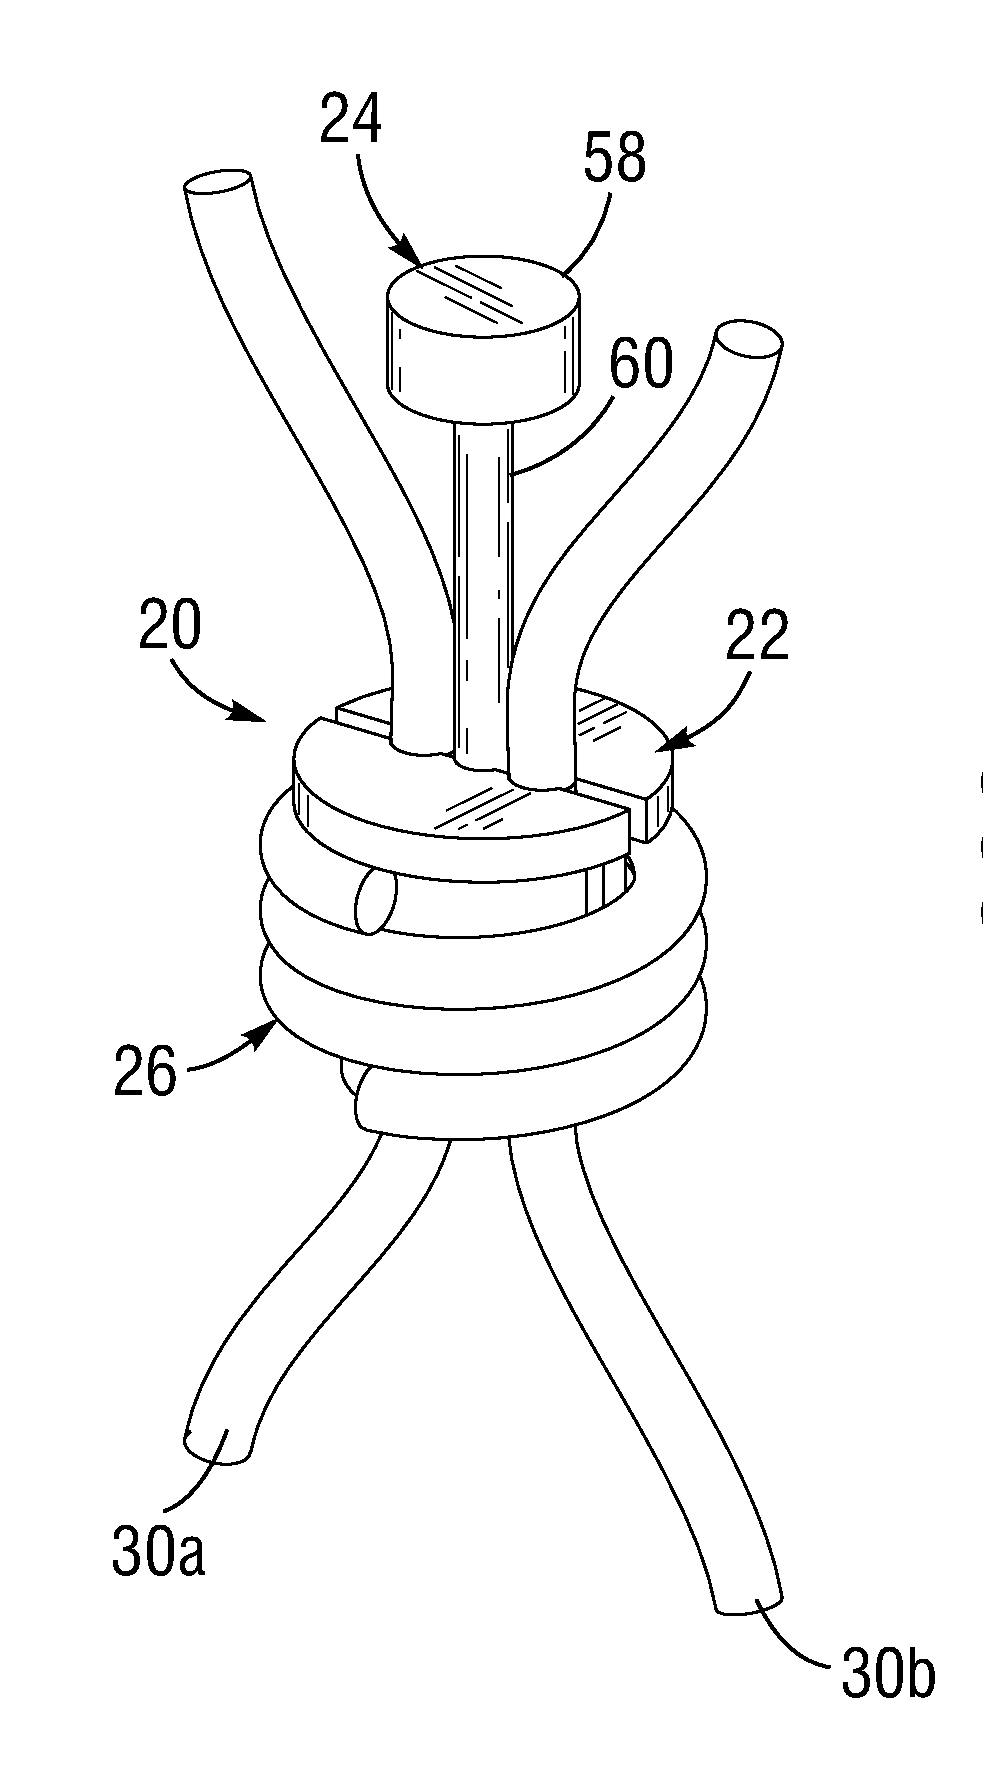 Knotless suture anchoring devices and tools for implants